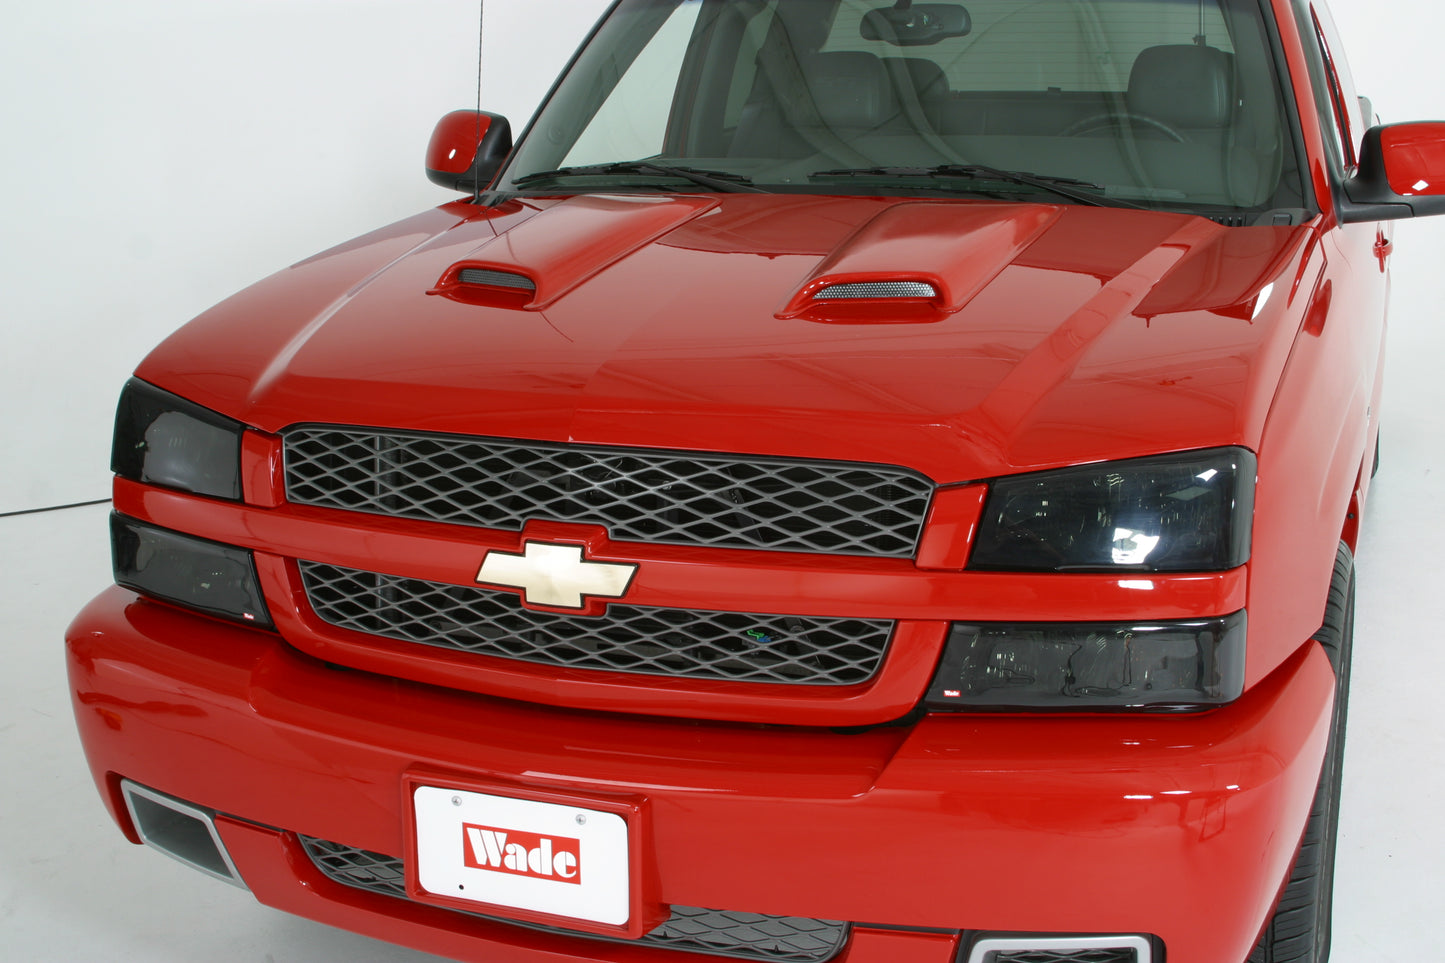 2001 Ford F-Series Head Light Covers